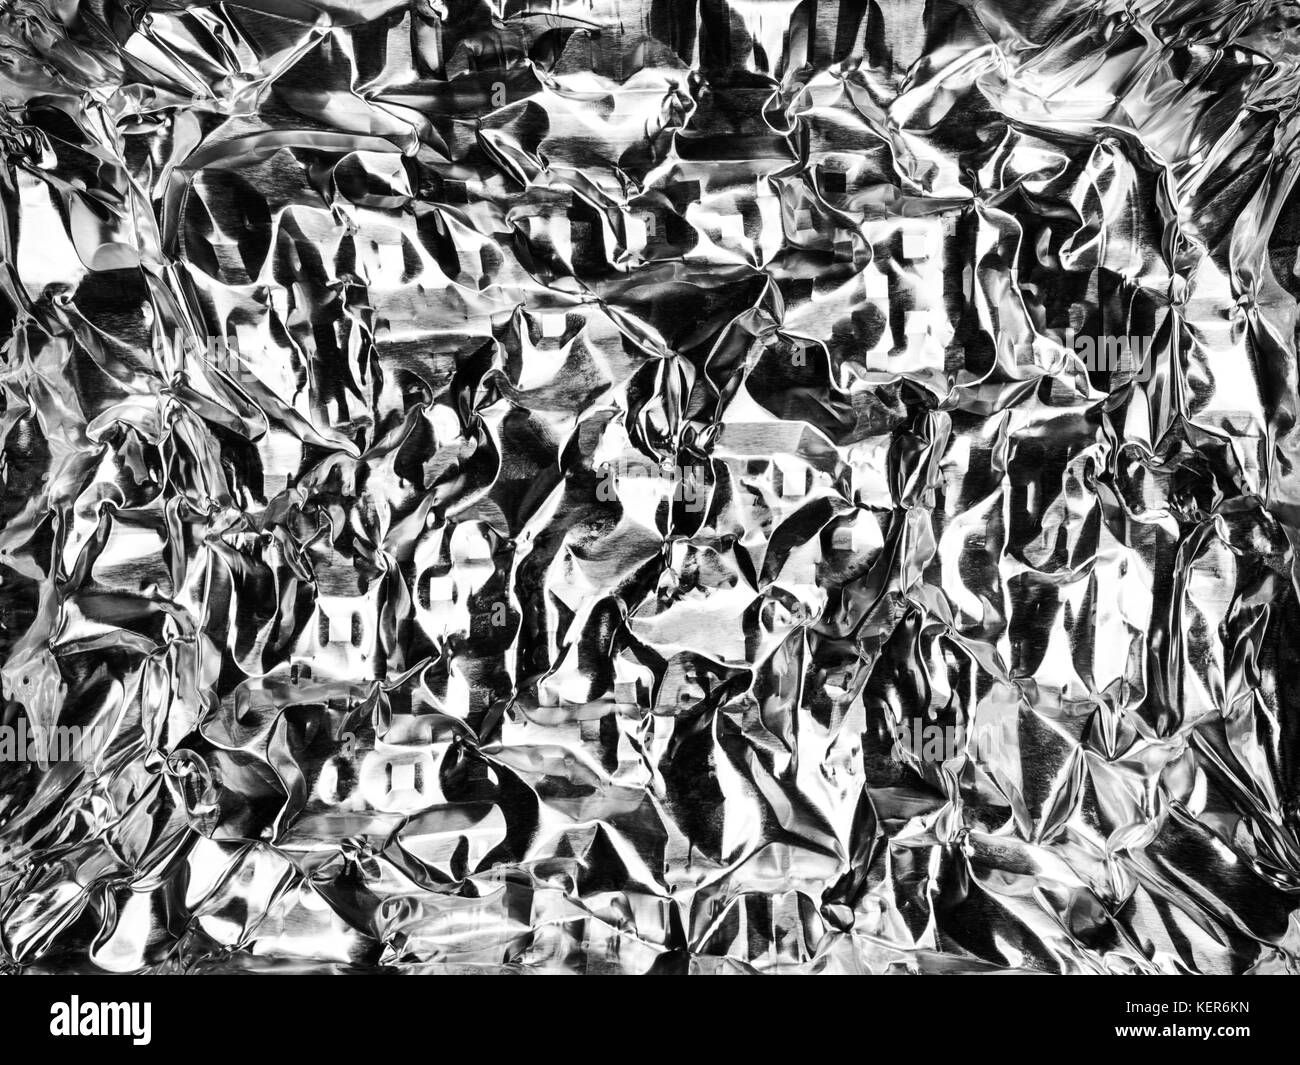 Abstract background of crumpled aluminum foil Stock Photo